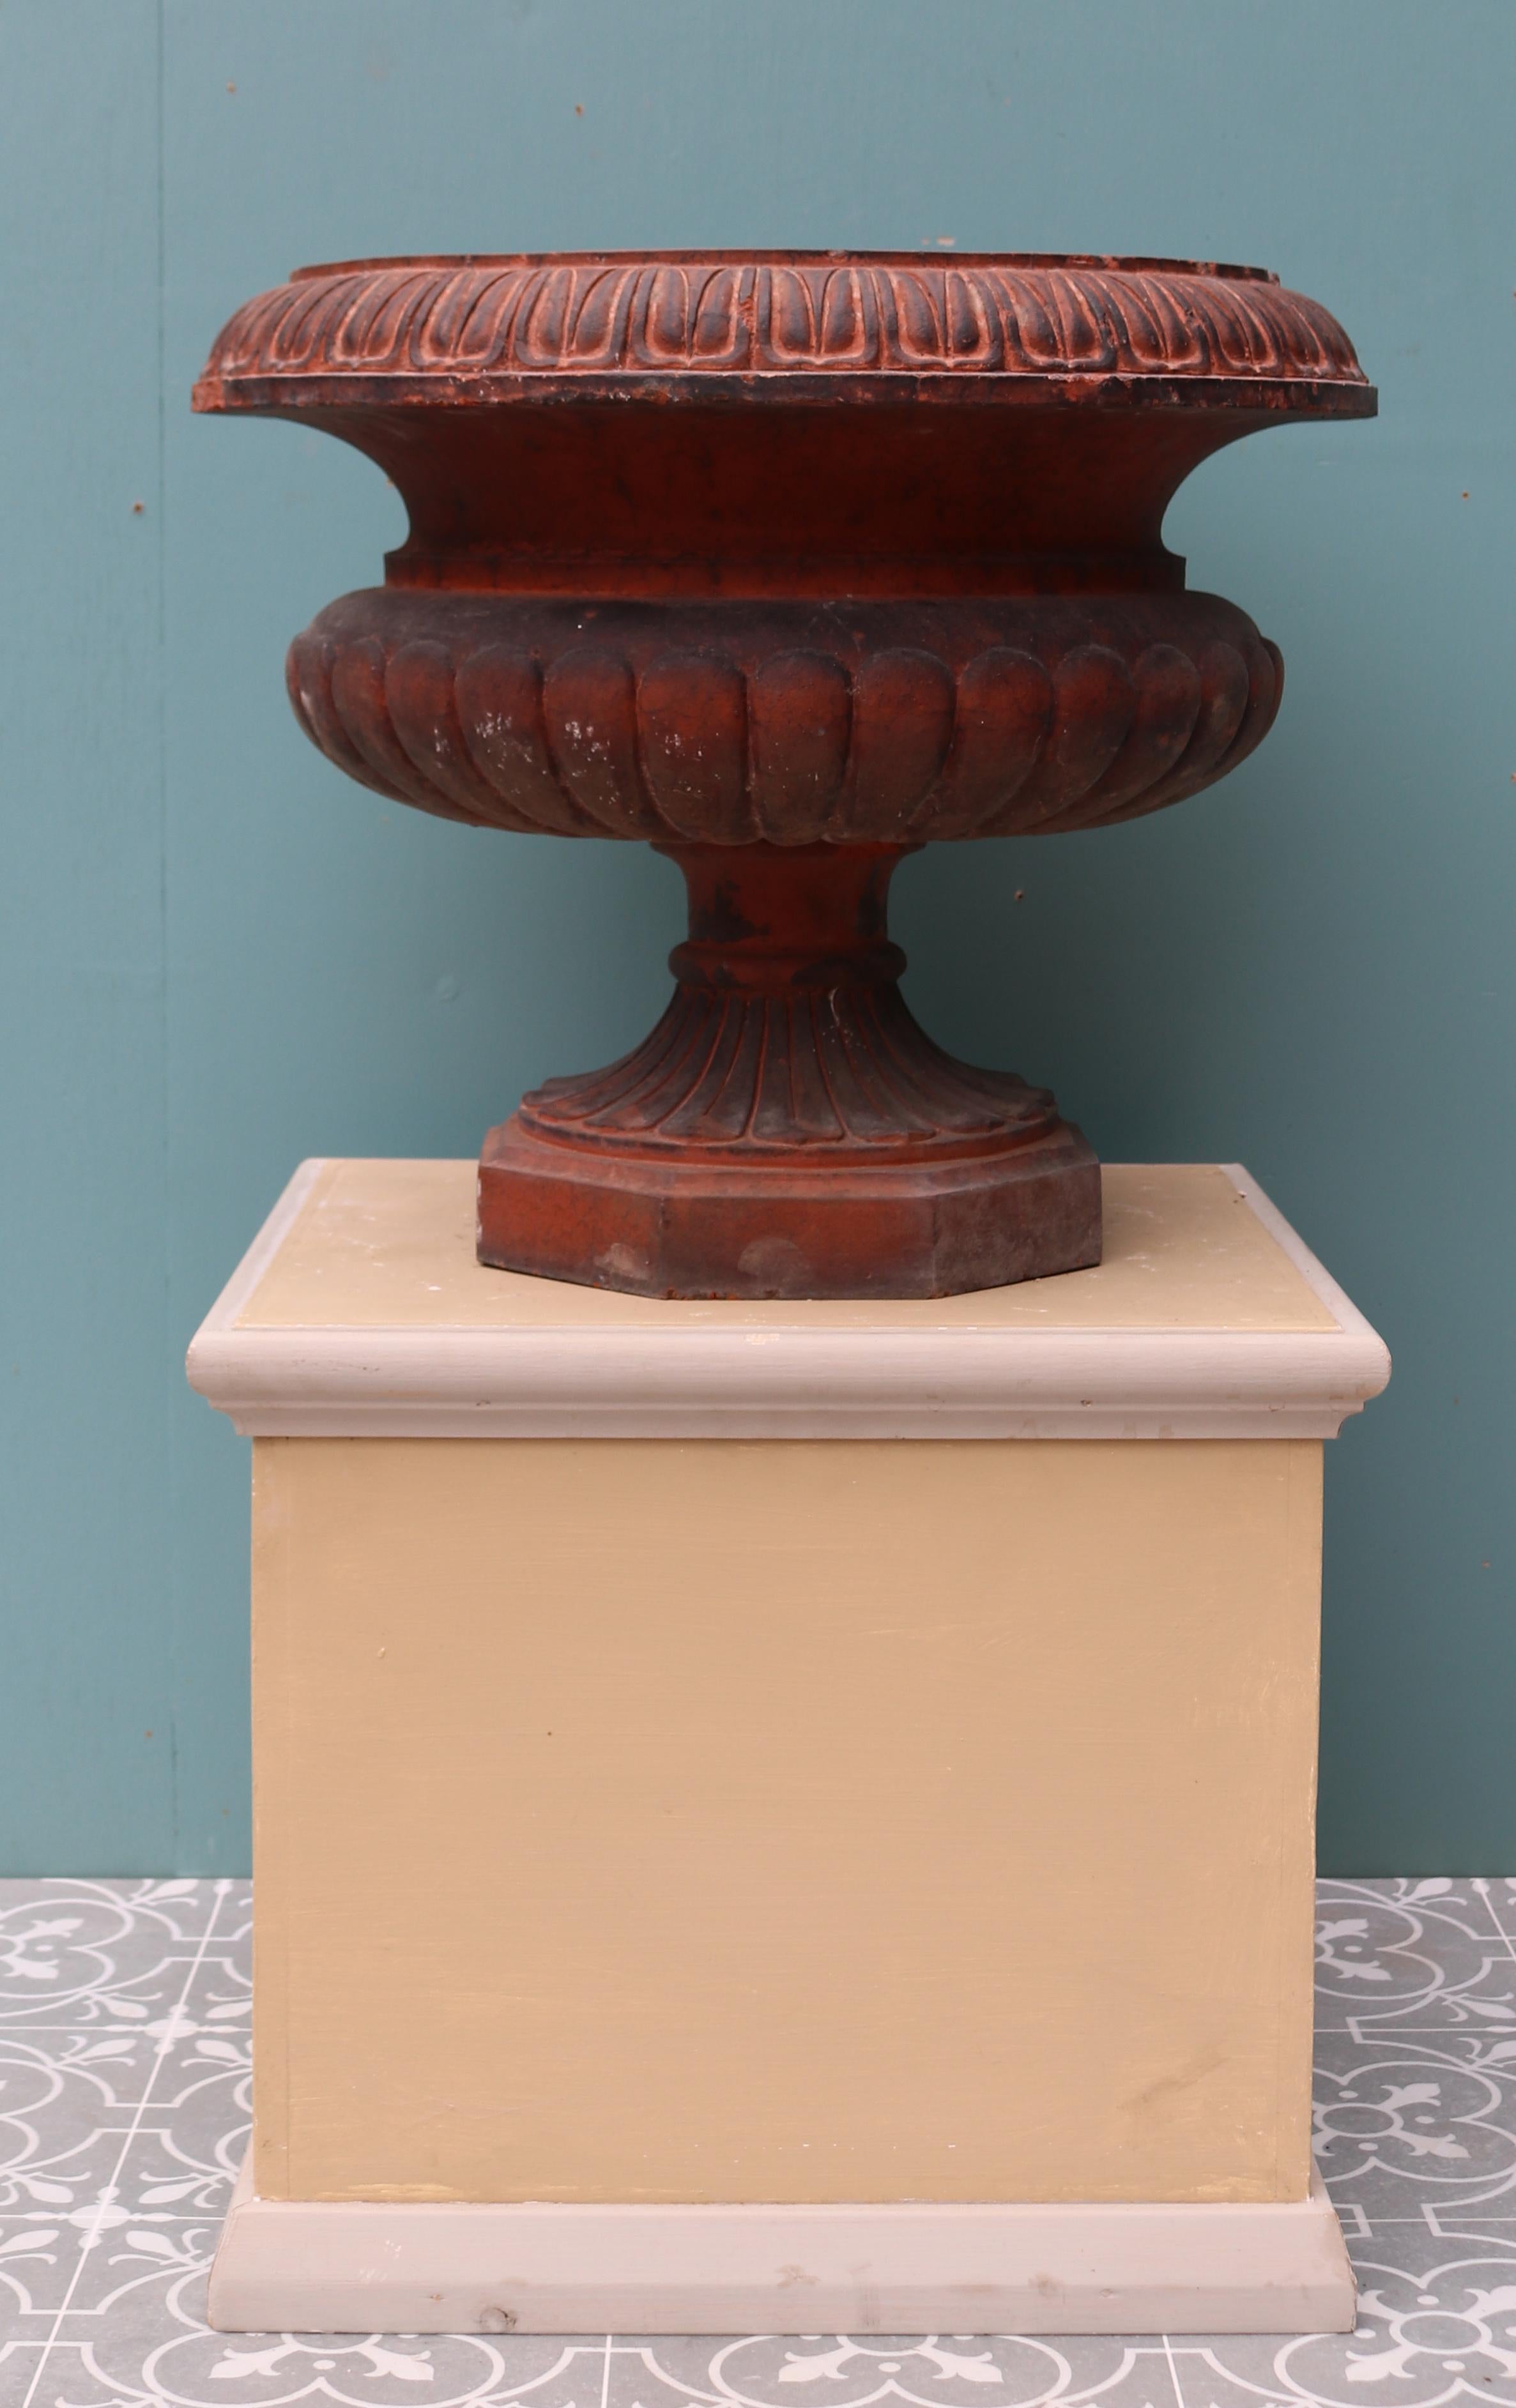 A red terracotta urn in the Victorian style.

Additional Dimensions

Base 24 x 24 cm.